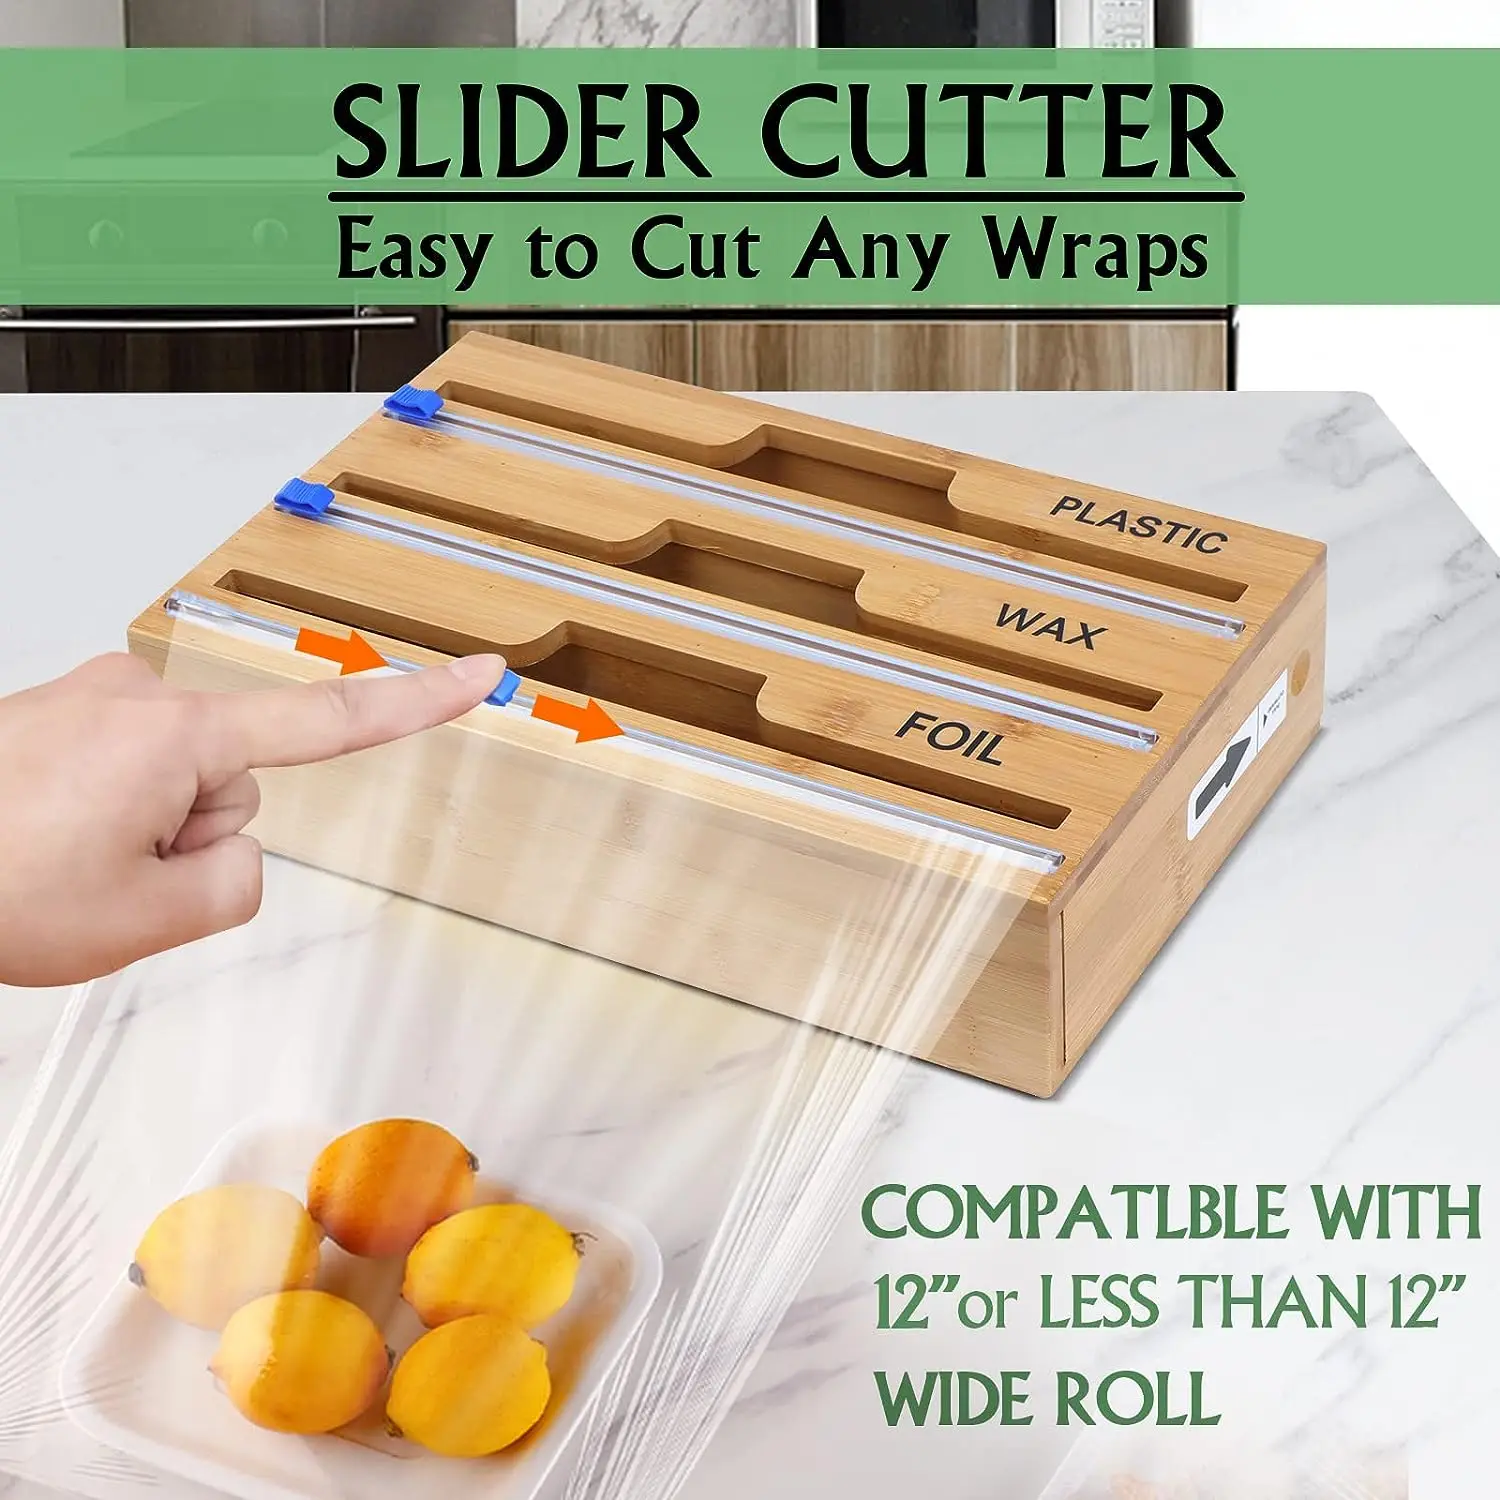 1pc Cling Film Cutter Minimalist Wall Mounted Wooden Kitchenware Multi Compartment Multi Layer Hidden Scratchers Two Way Cutter